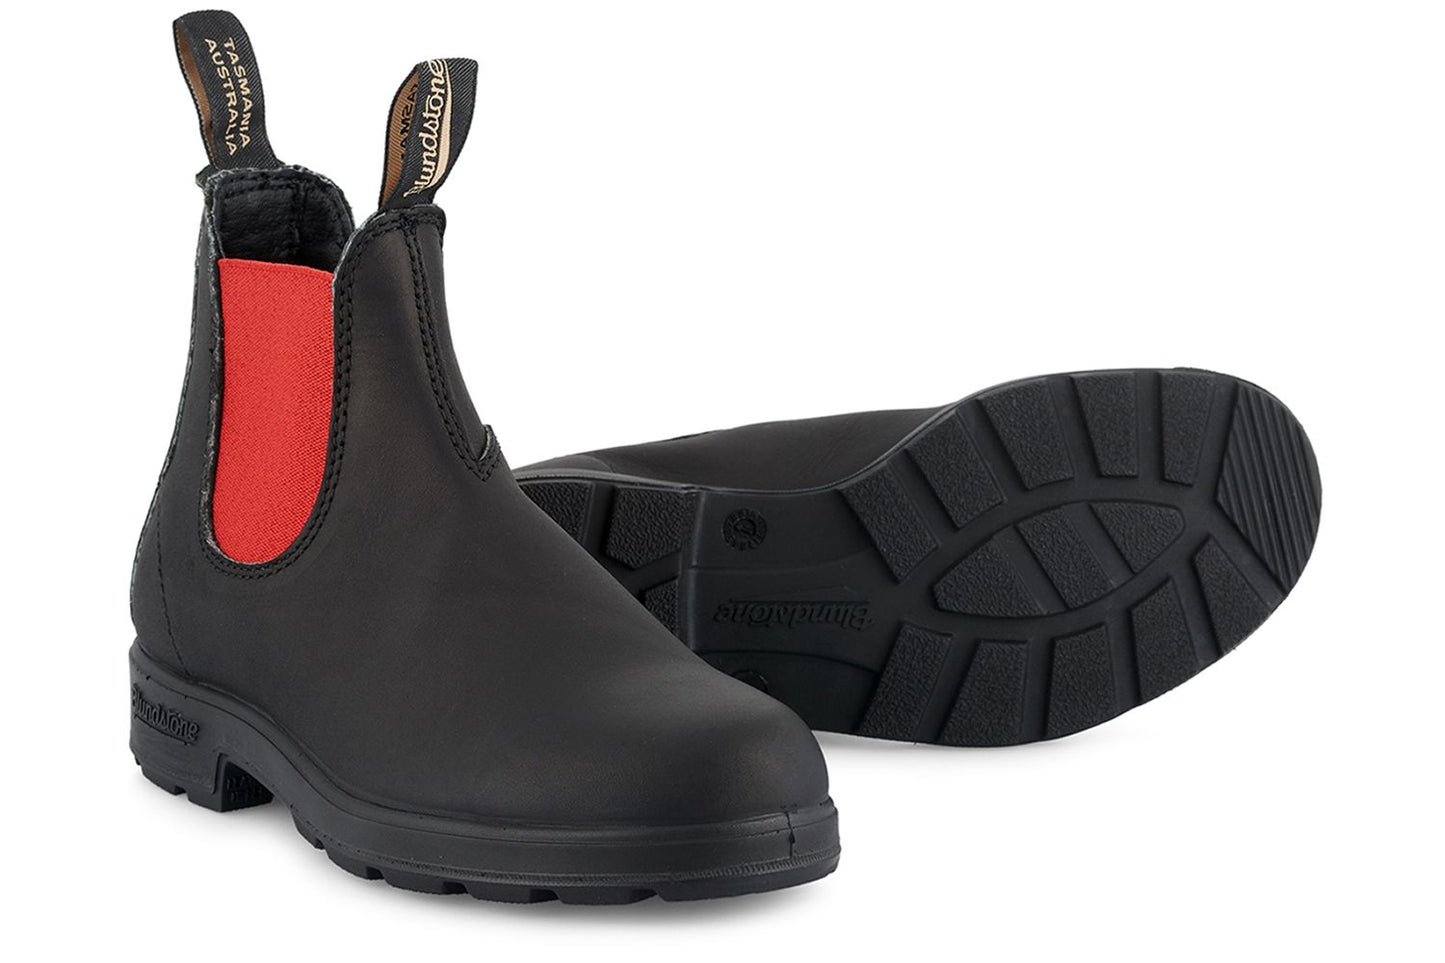 Blundstone 508 Black with Red Panel Leather Chelsea Boot